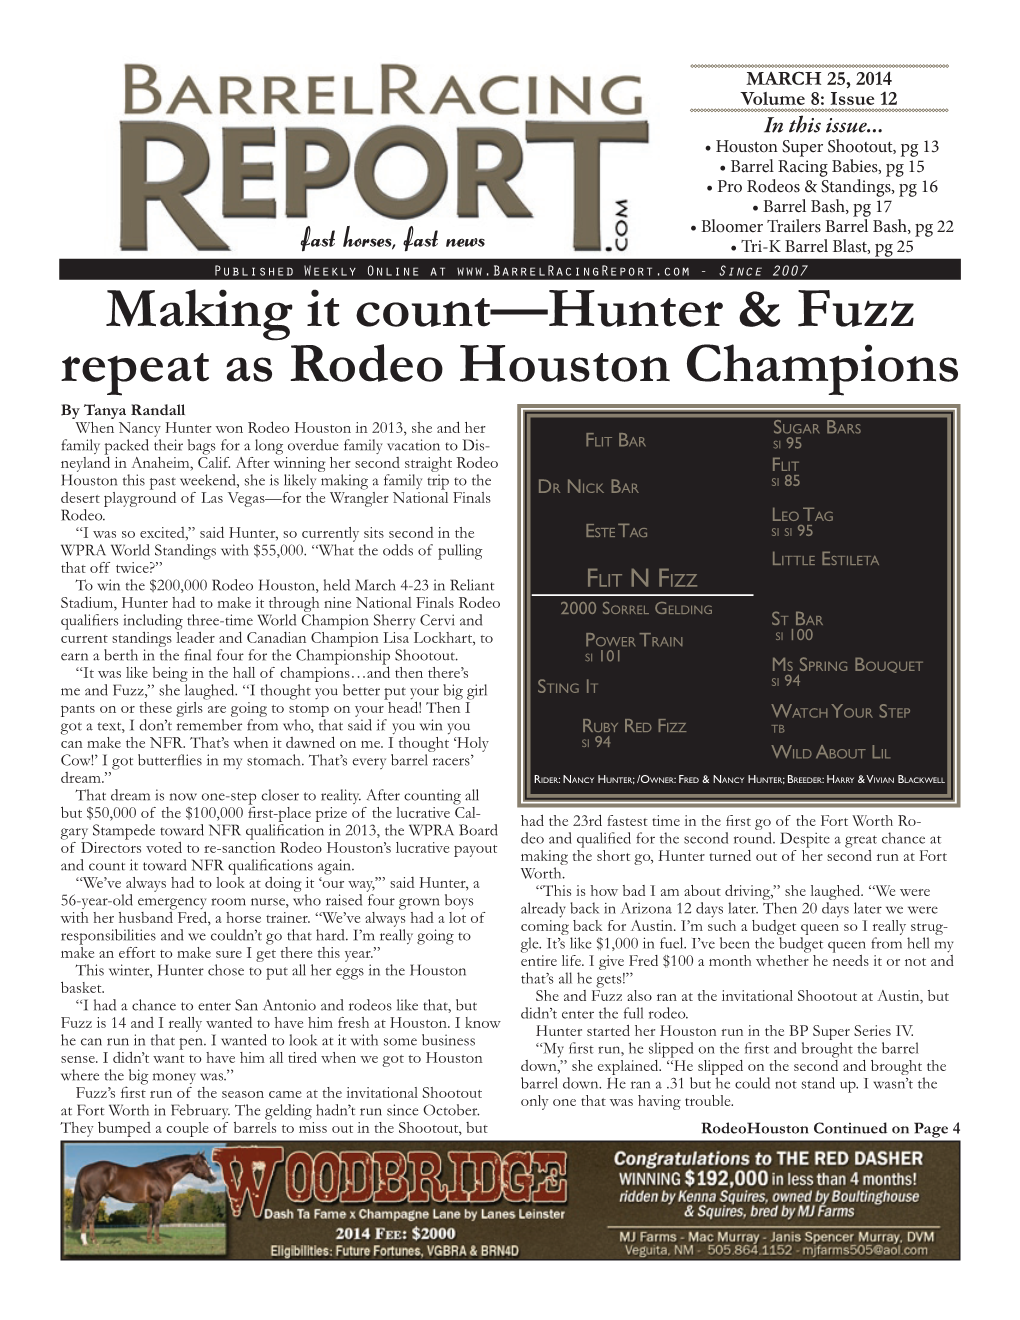 Making It Count—Hunter & Fuzz Repeat As Rodeo Houston Champions